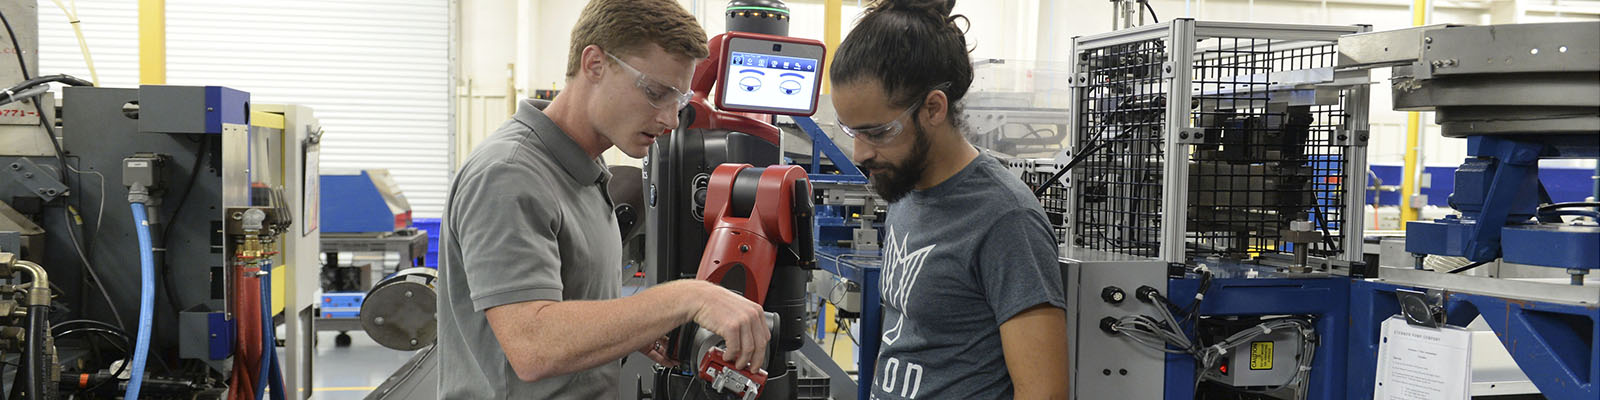 two men working on a robot